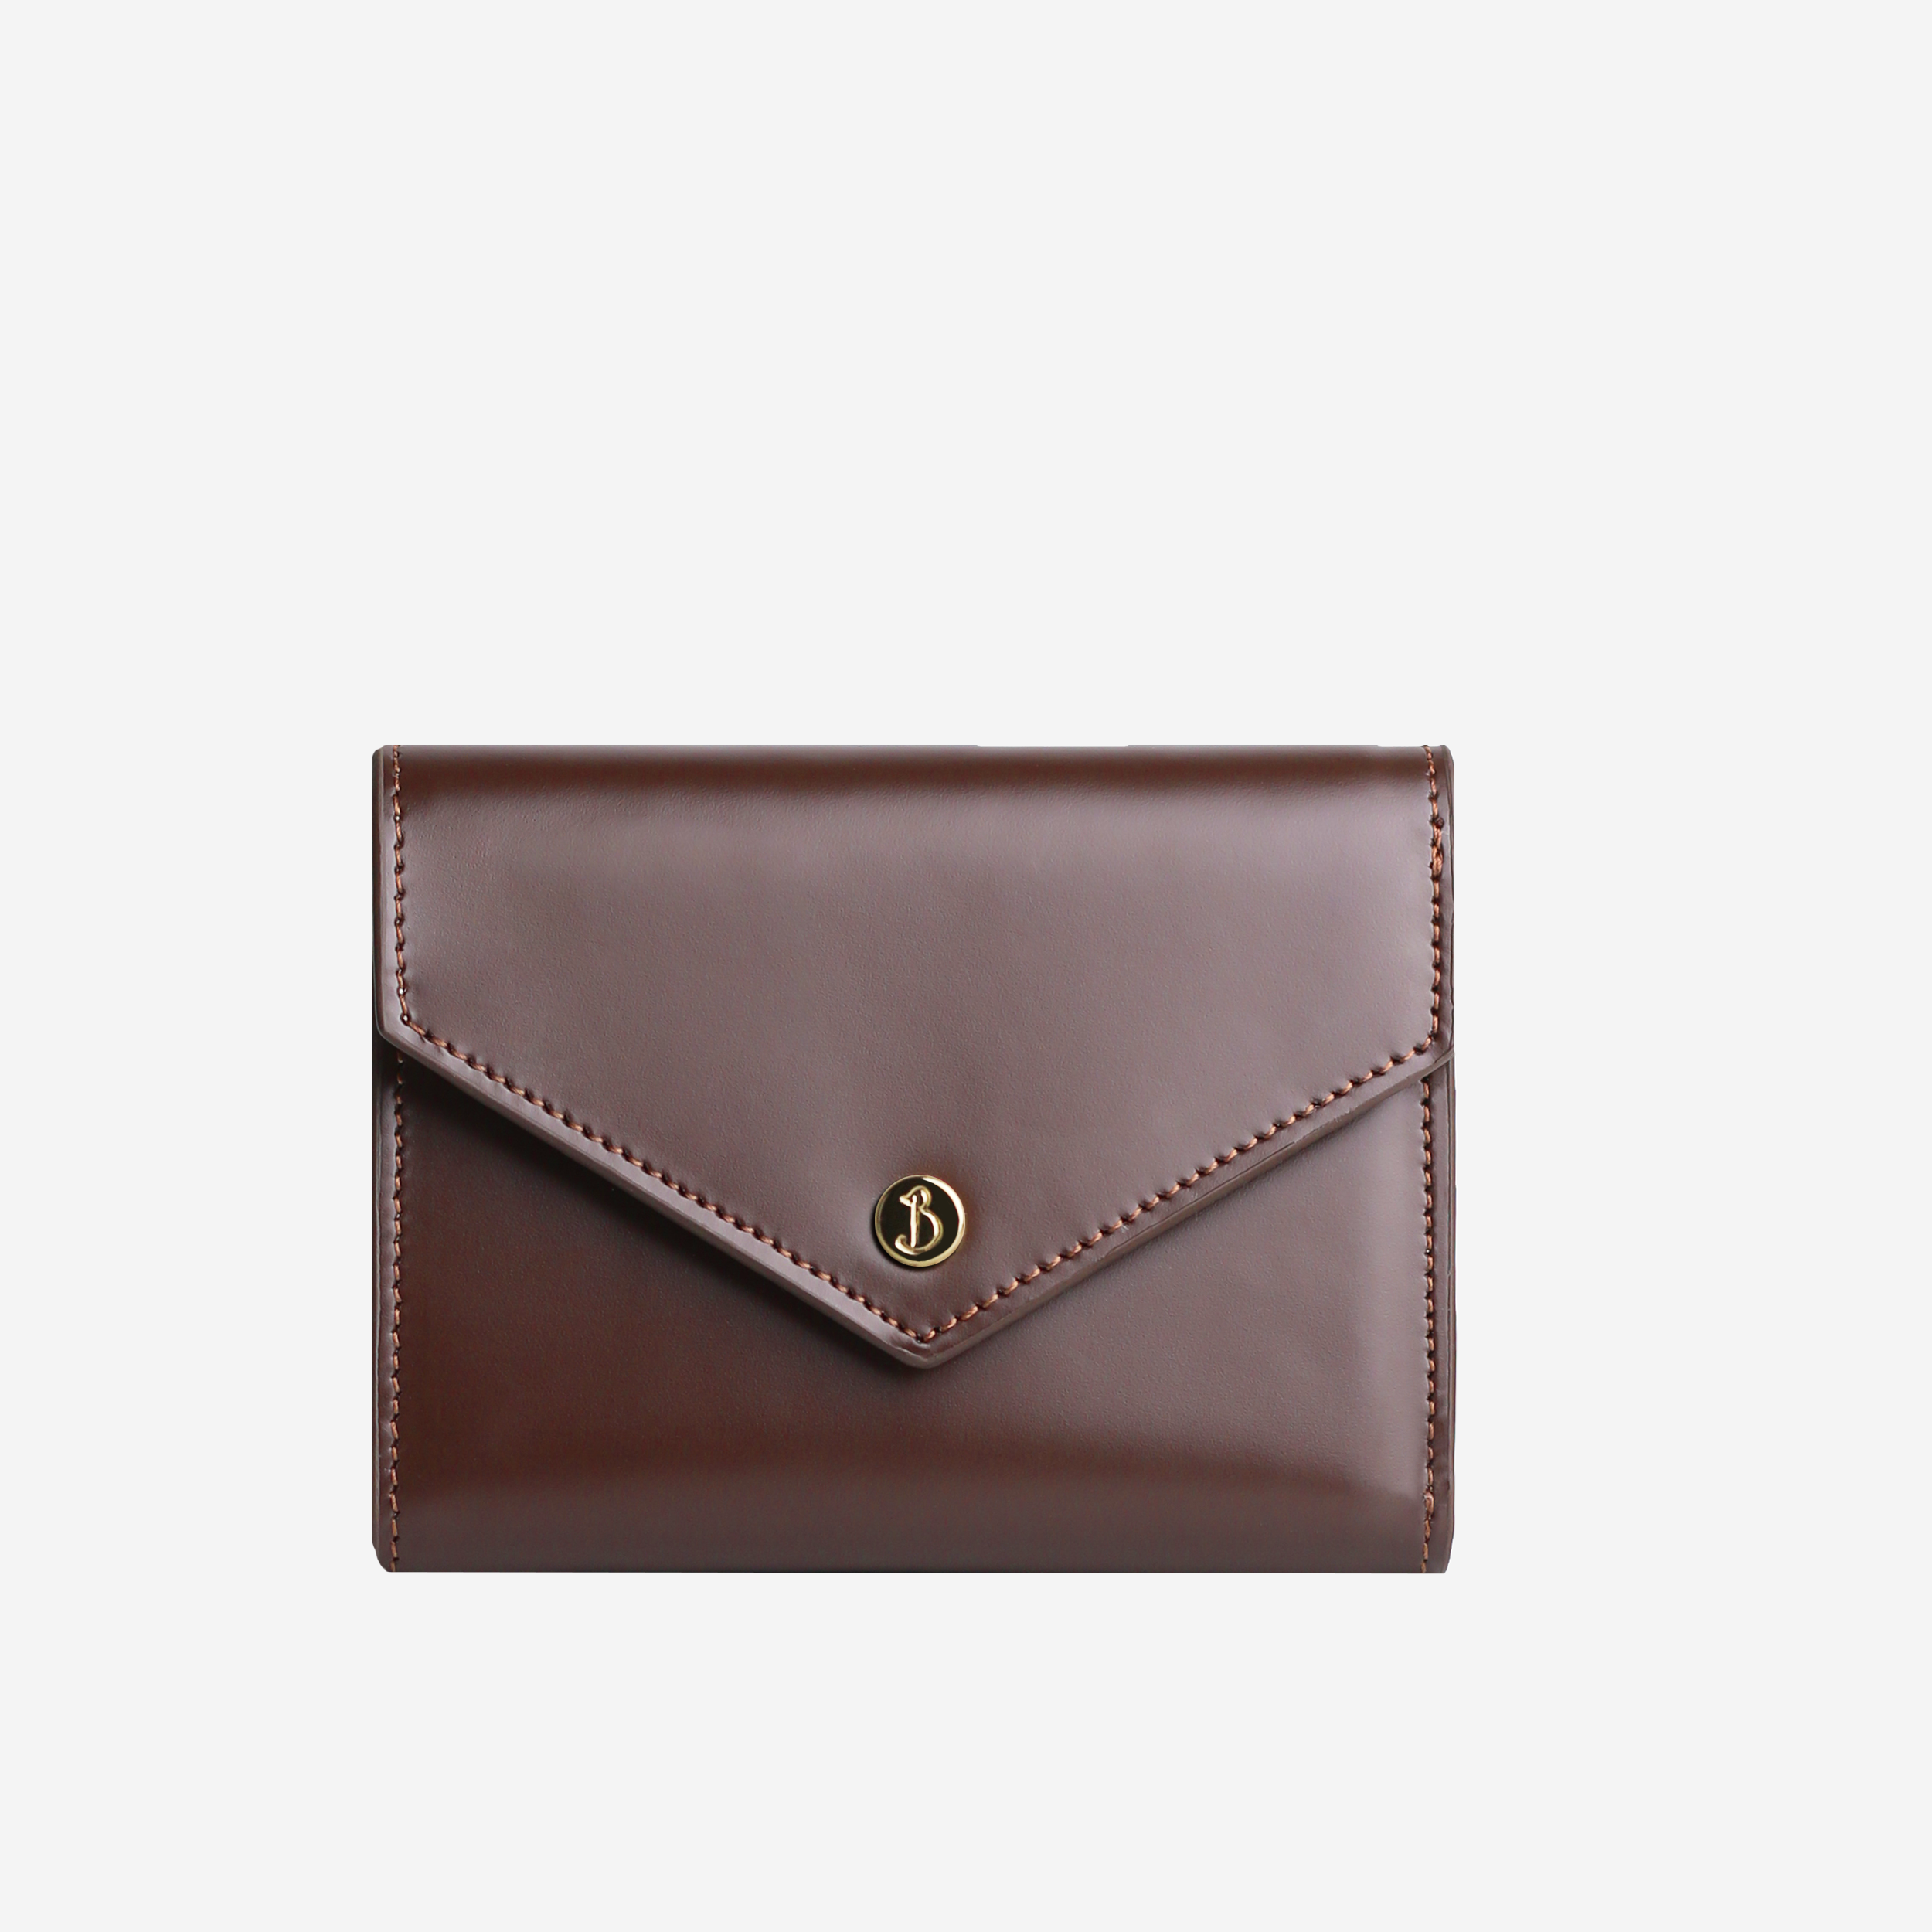 B+WALLET - Chocolate Brownie Small